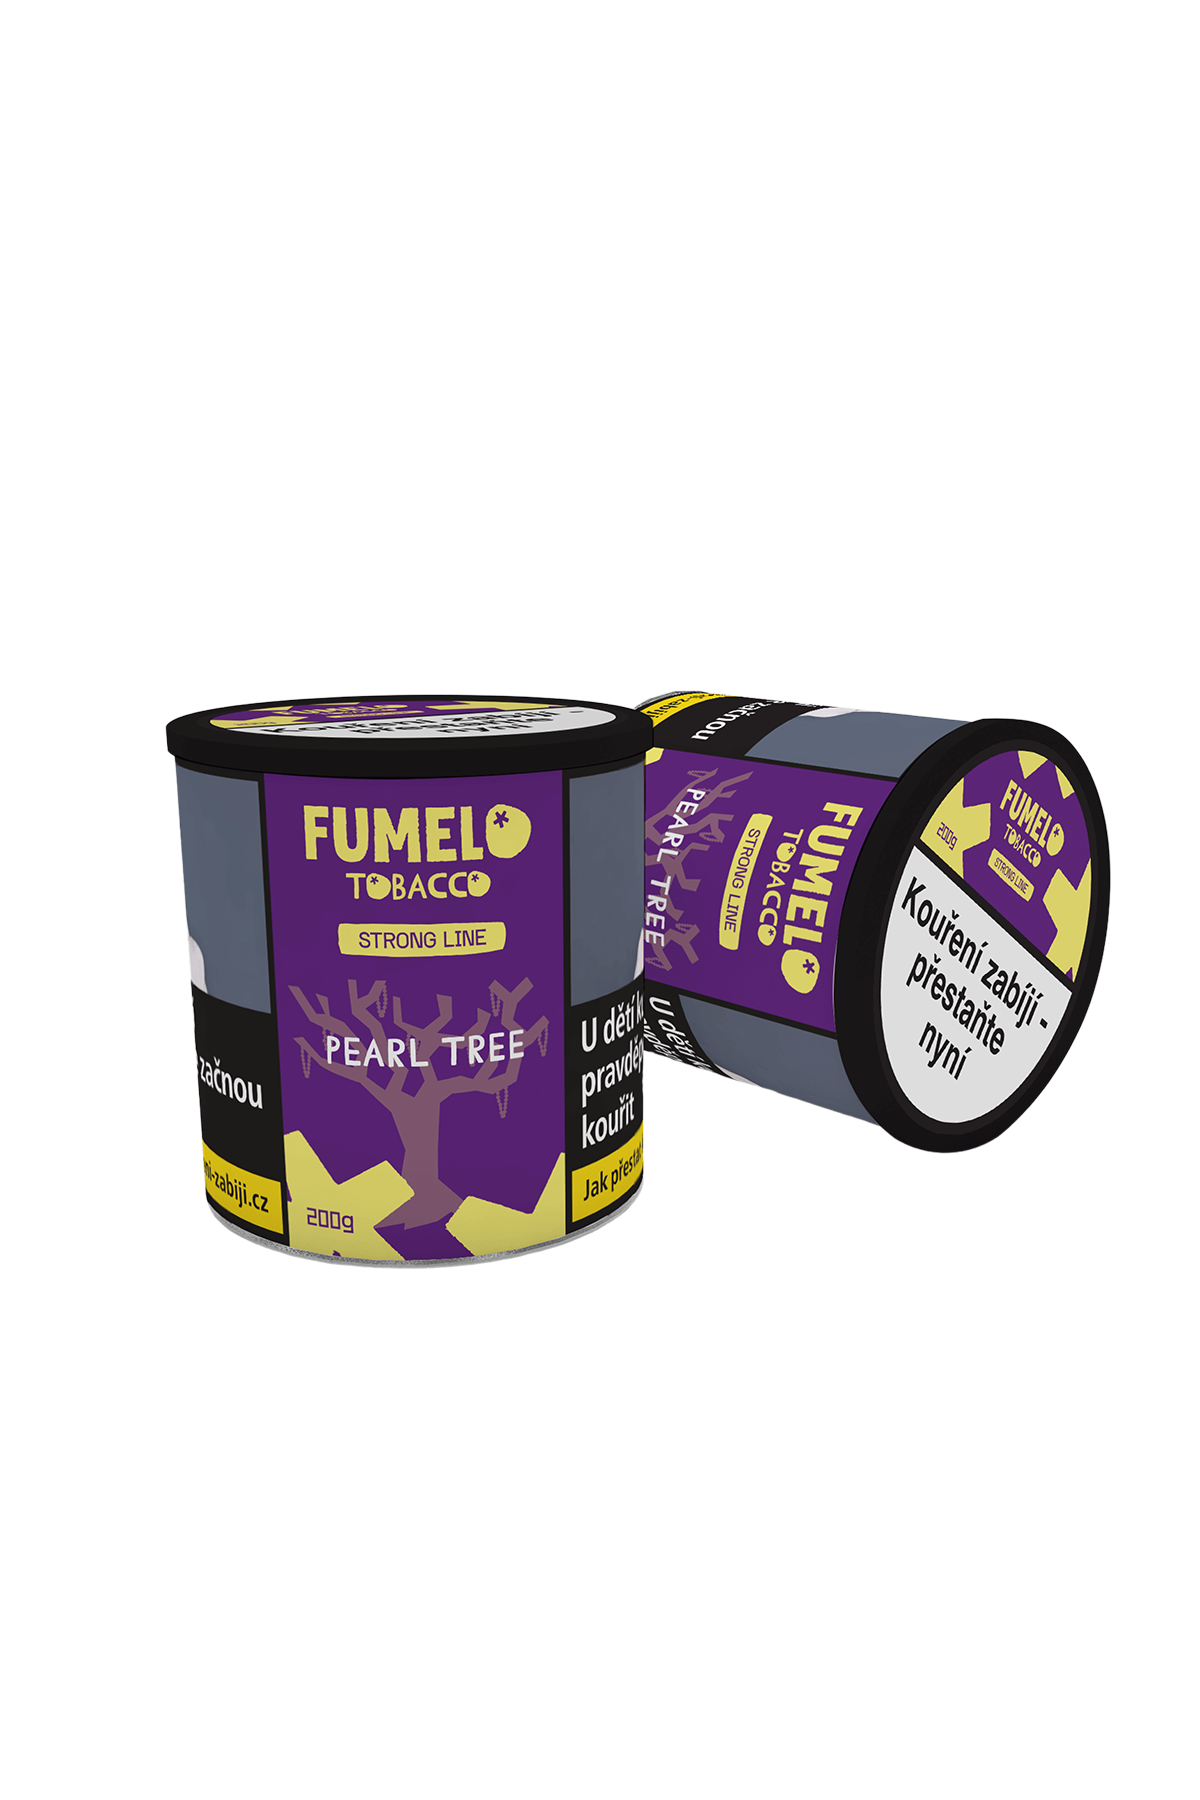 Tabák - Fumelo Strong 200gr - Paerltree